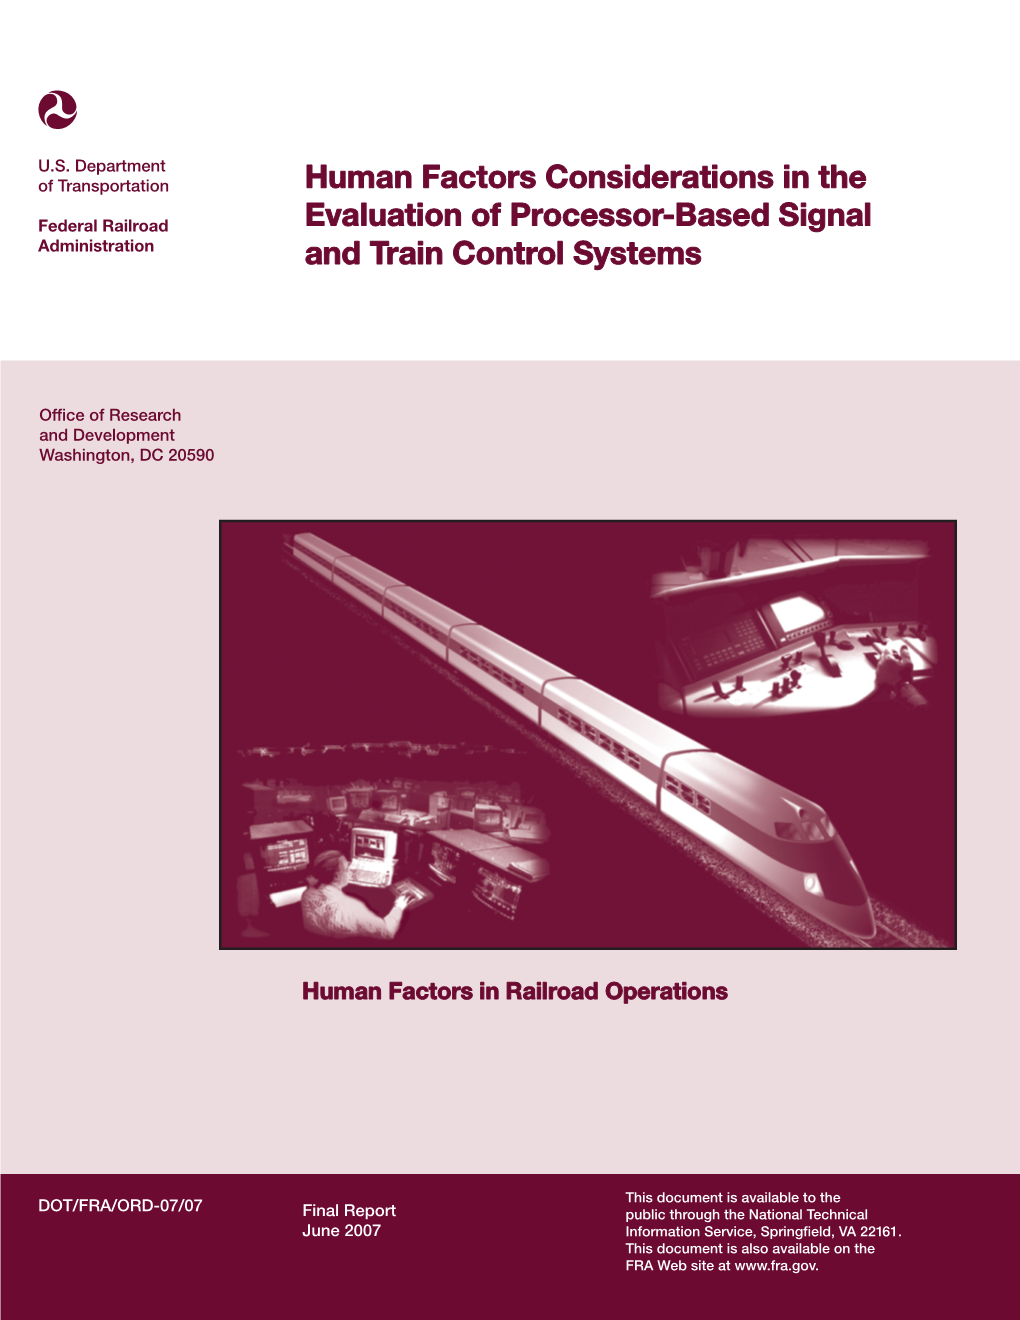 Human Factors Considerations in the Evaluation of Processor-Based Signal and Train RR04/CB101 Control Systems: Human Factors in Railroad Operations